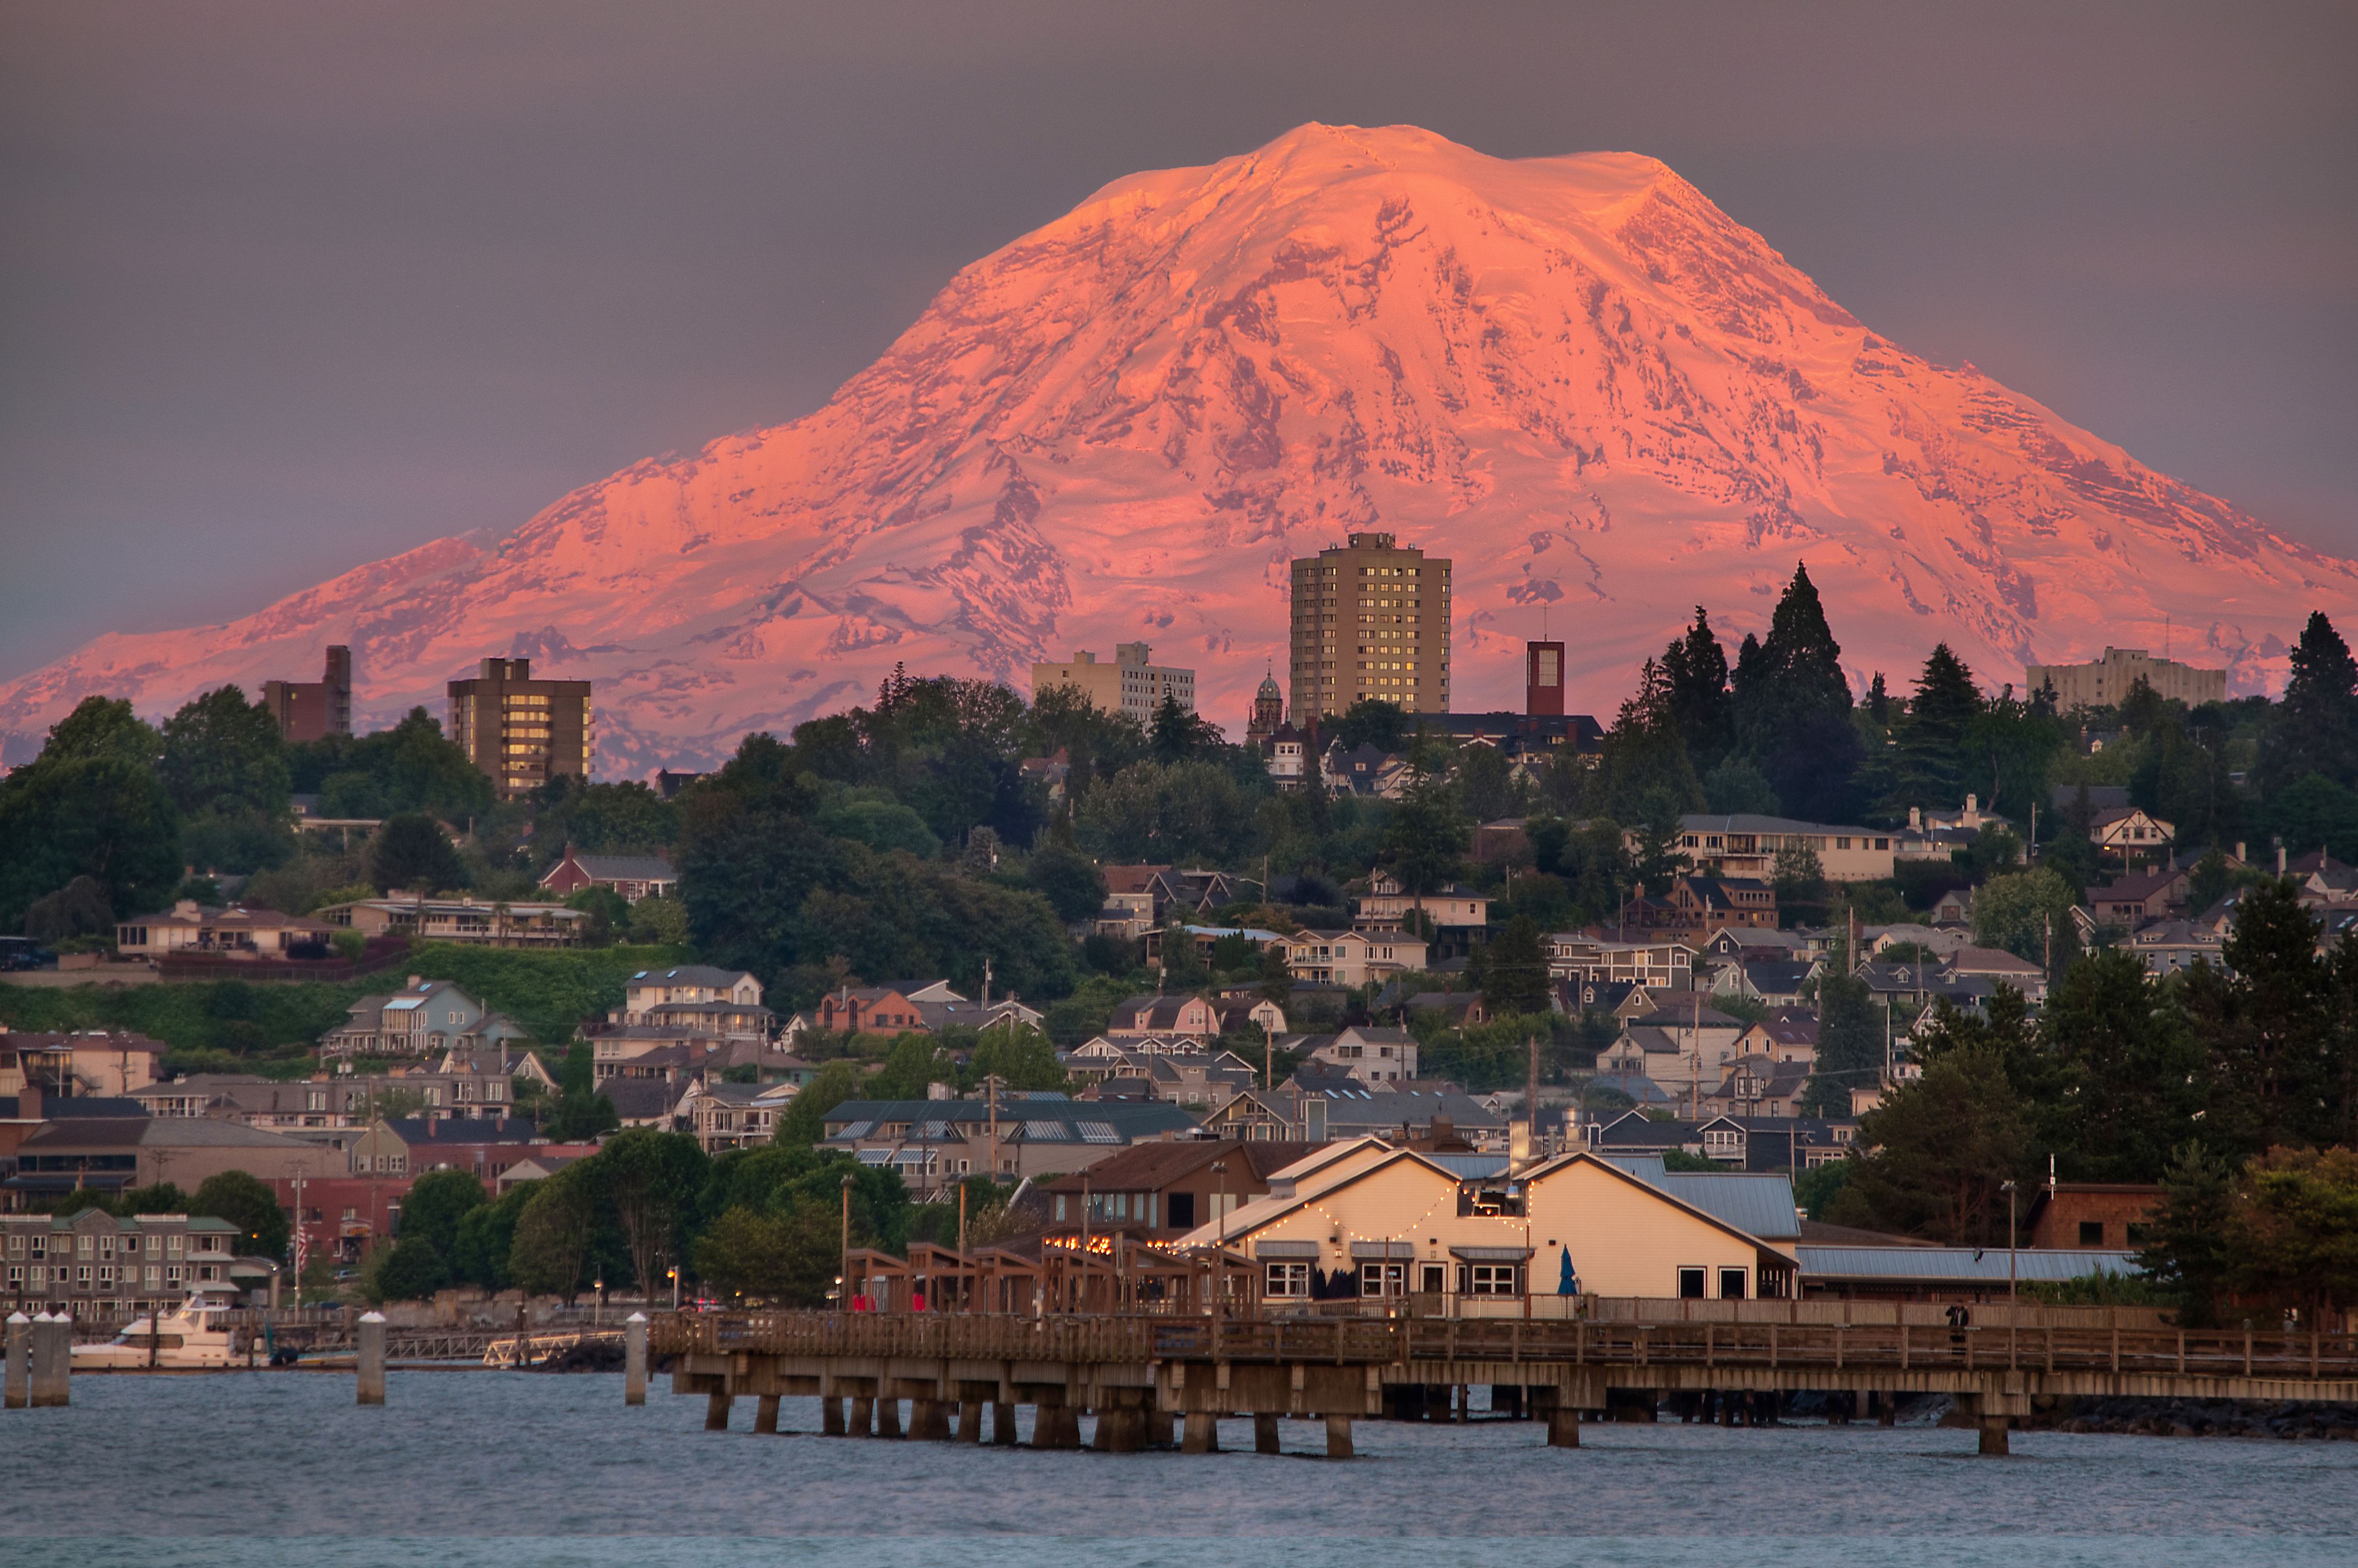 11 Fun Attractions and Activities in Tacoma, Washington